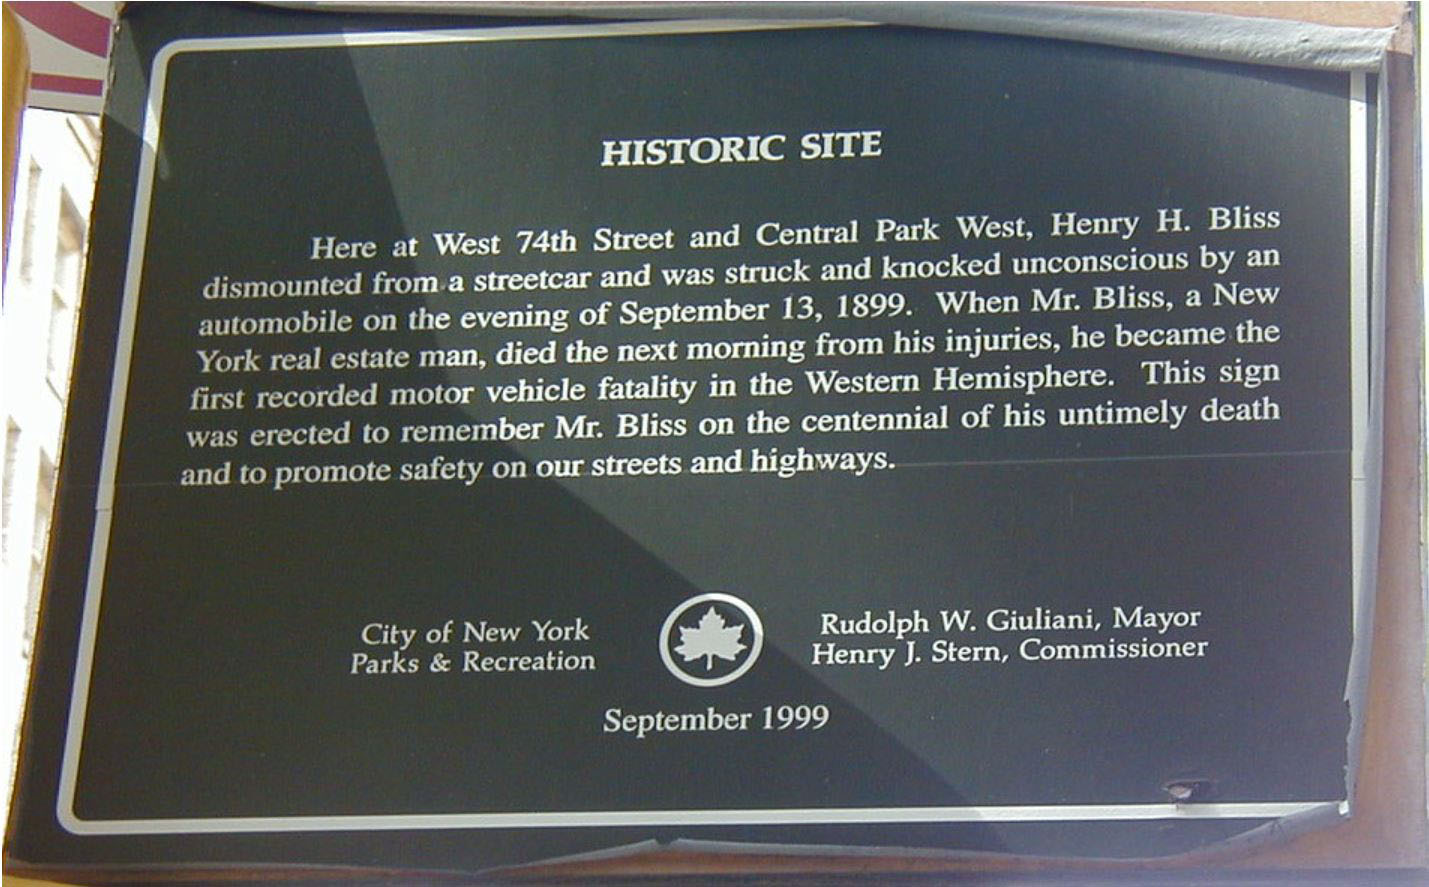 Photograph of the Hostoric plaque. It reads: Here at West 74th Street and Central Park West, Henry H. Bliss dismounted from a streetcar and was struck and knocked unconscious by an automobile on the evening of September 13, 1899. When Mr. Bliss, a New York real estate man, died the next morning from his injuries, he became the first recorded motor vehicle fatality in the Western Hemisphere. This sign was erected to remember Mr. Bliss on the centennial of his untimely death and to promote safety on our streets and highways.